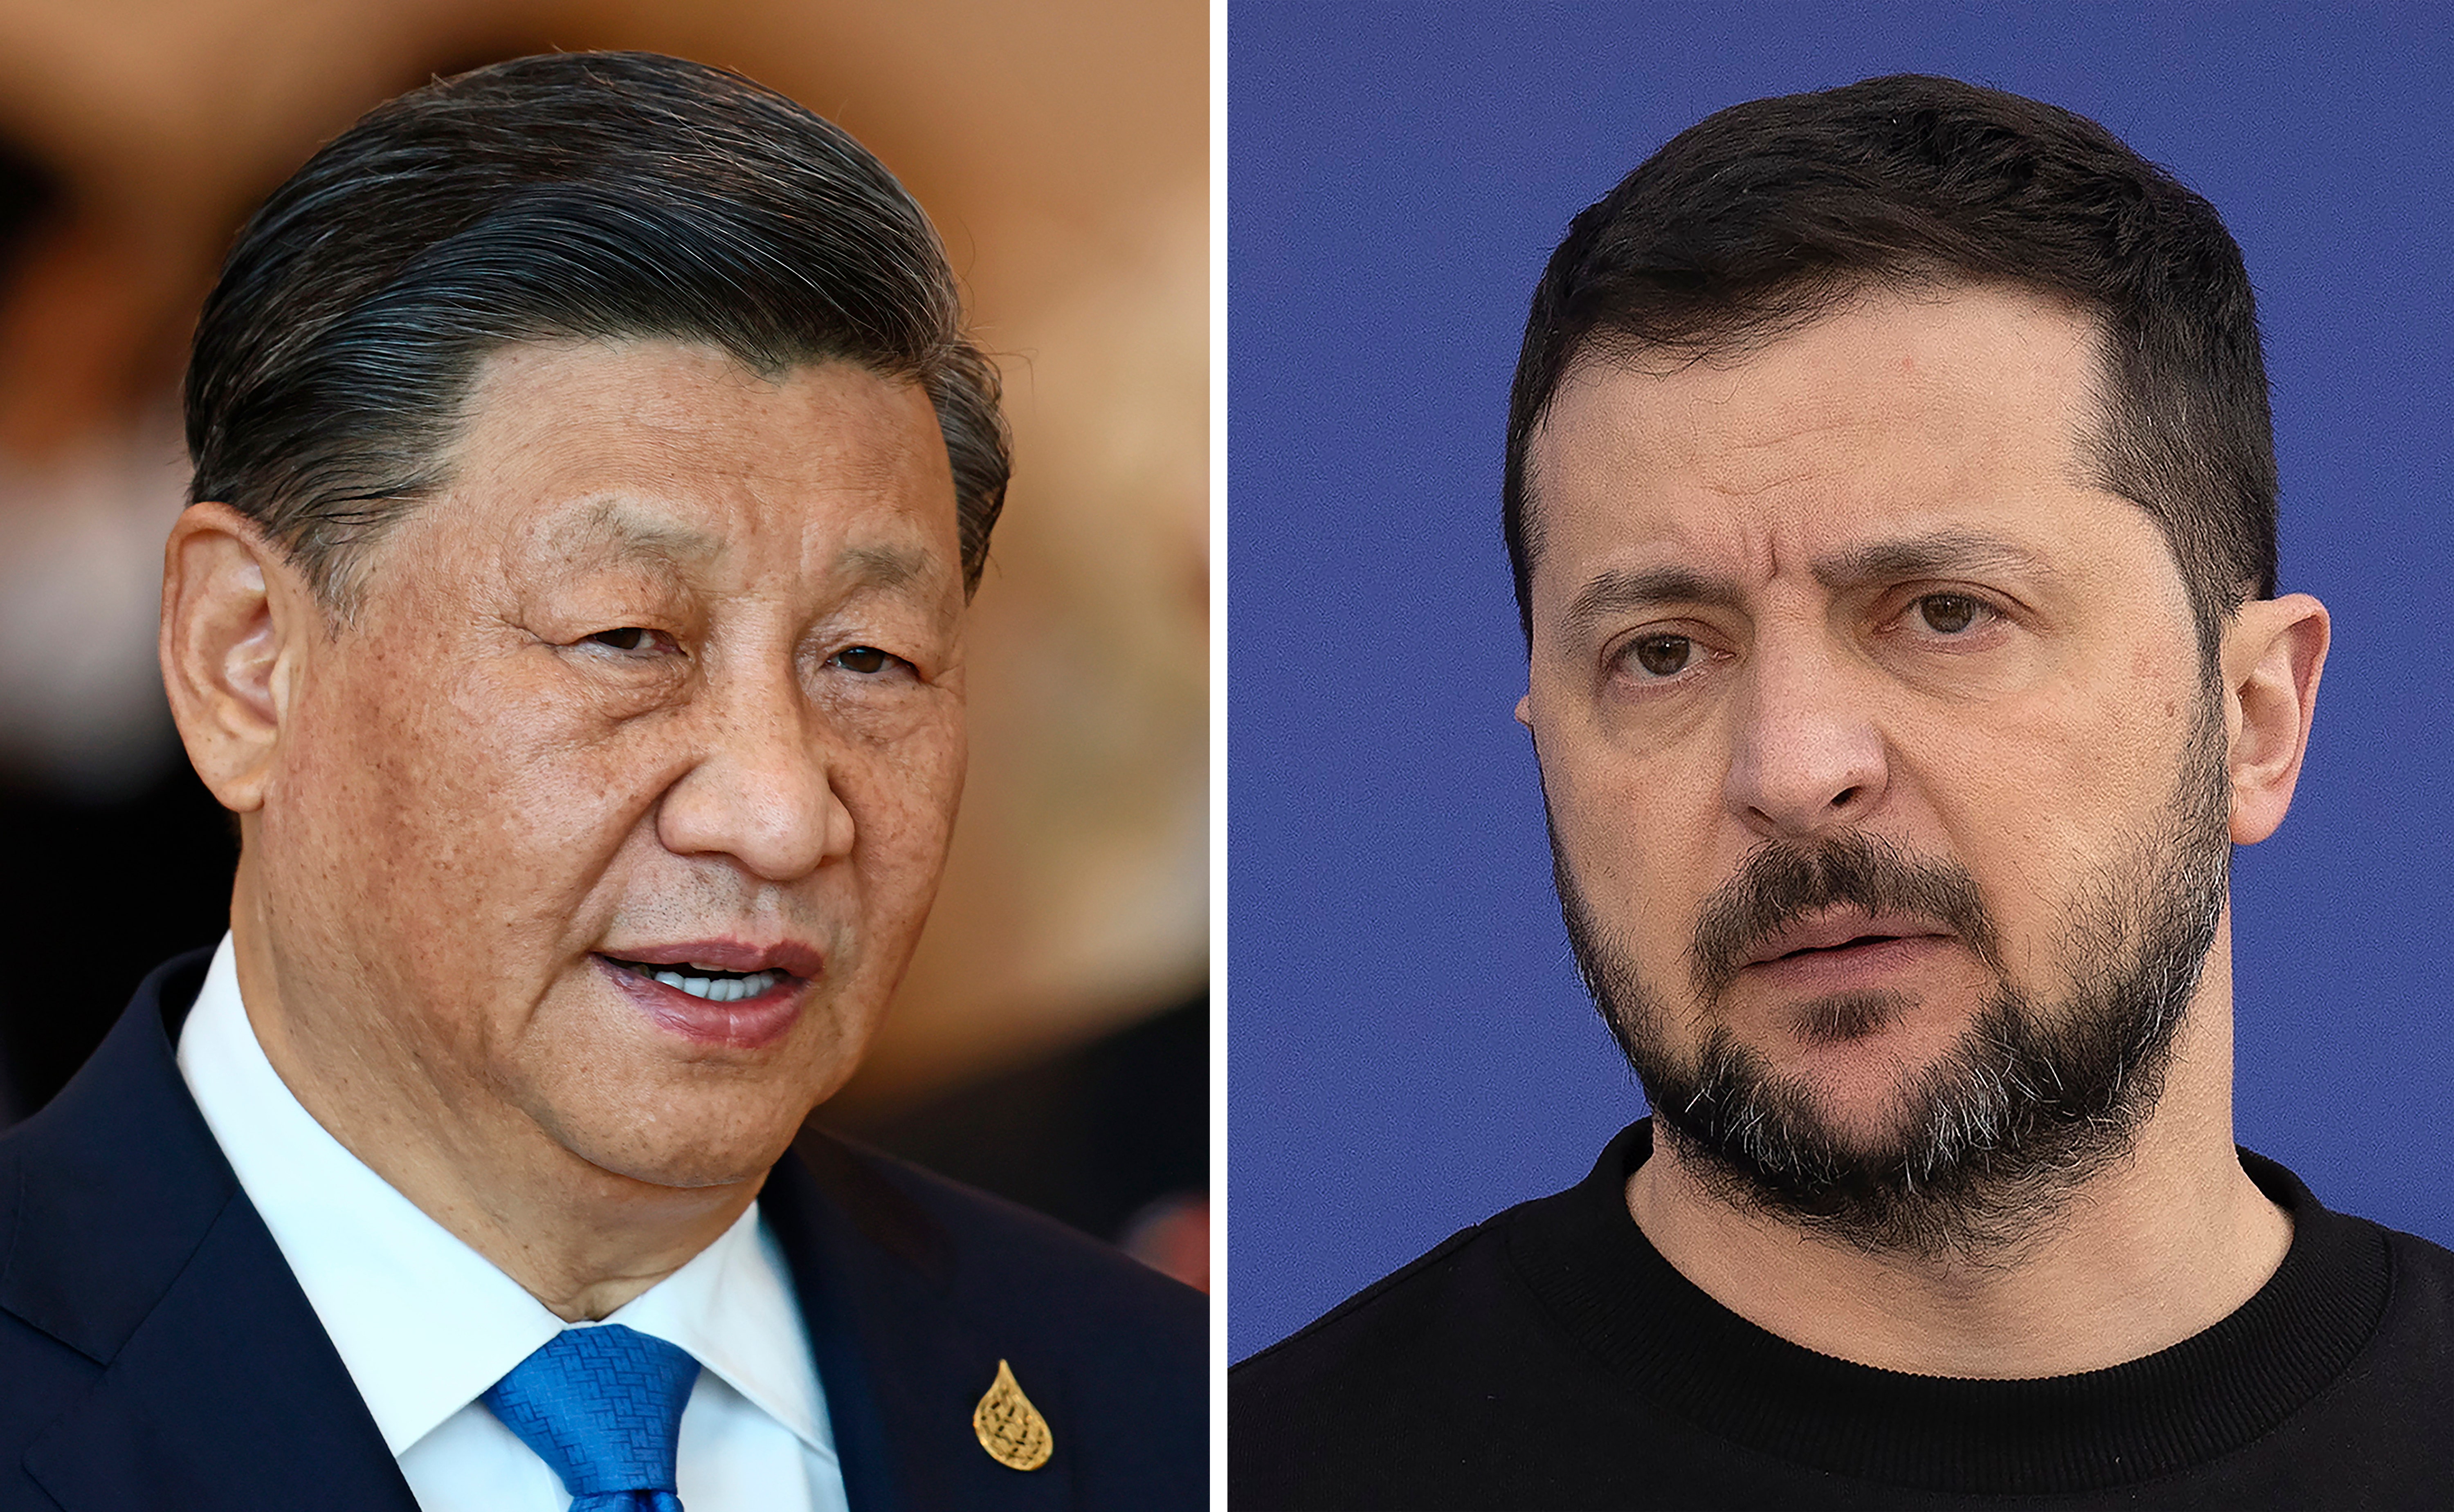 China to send peace envoy to Ukraine, Xi tells Zelenskyy in call